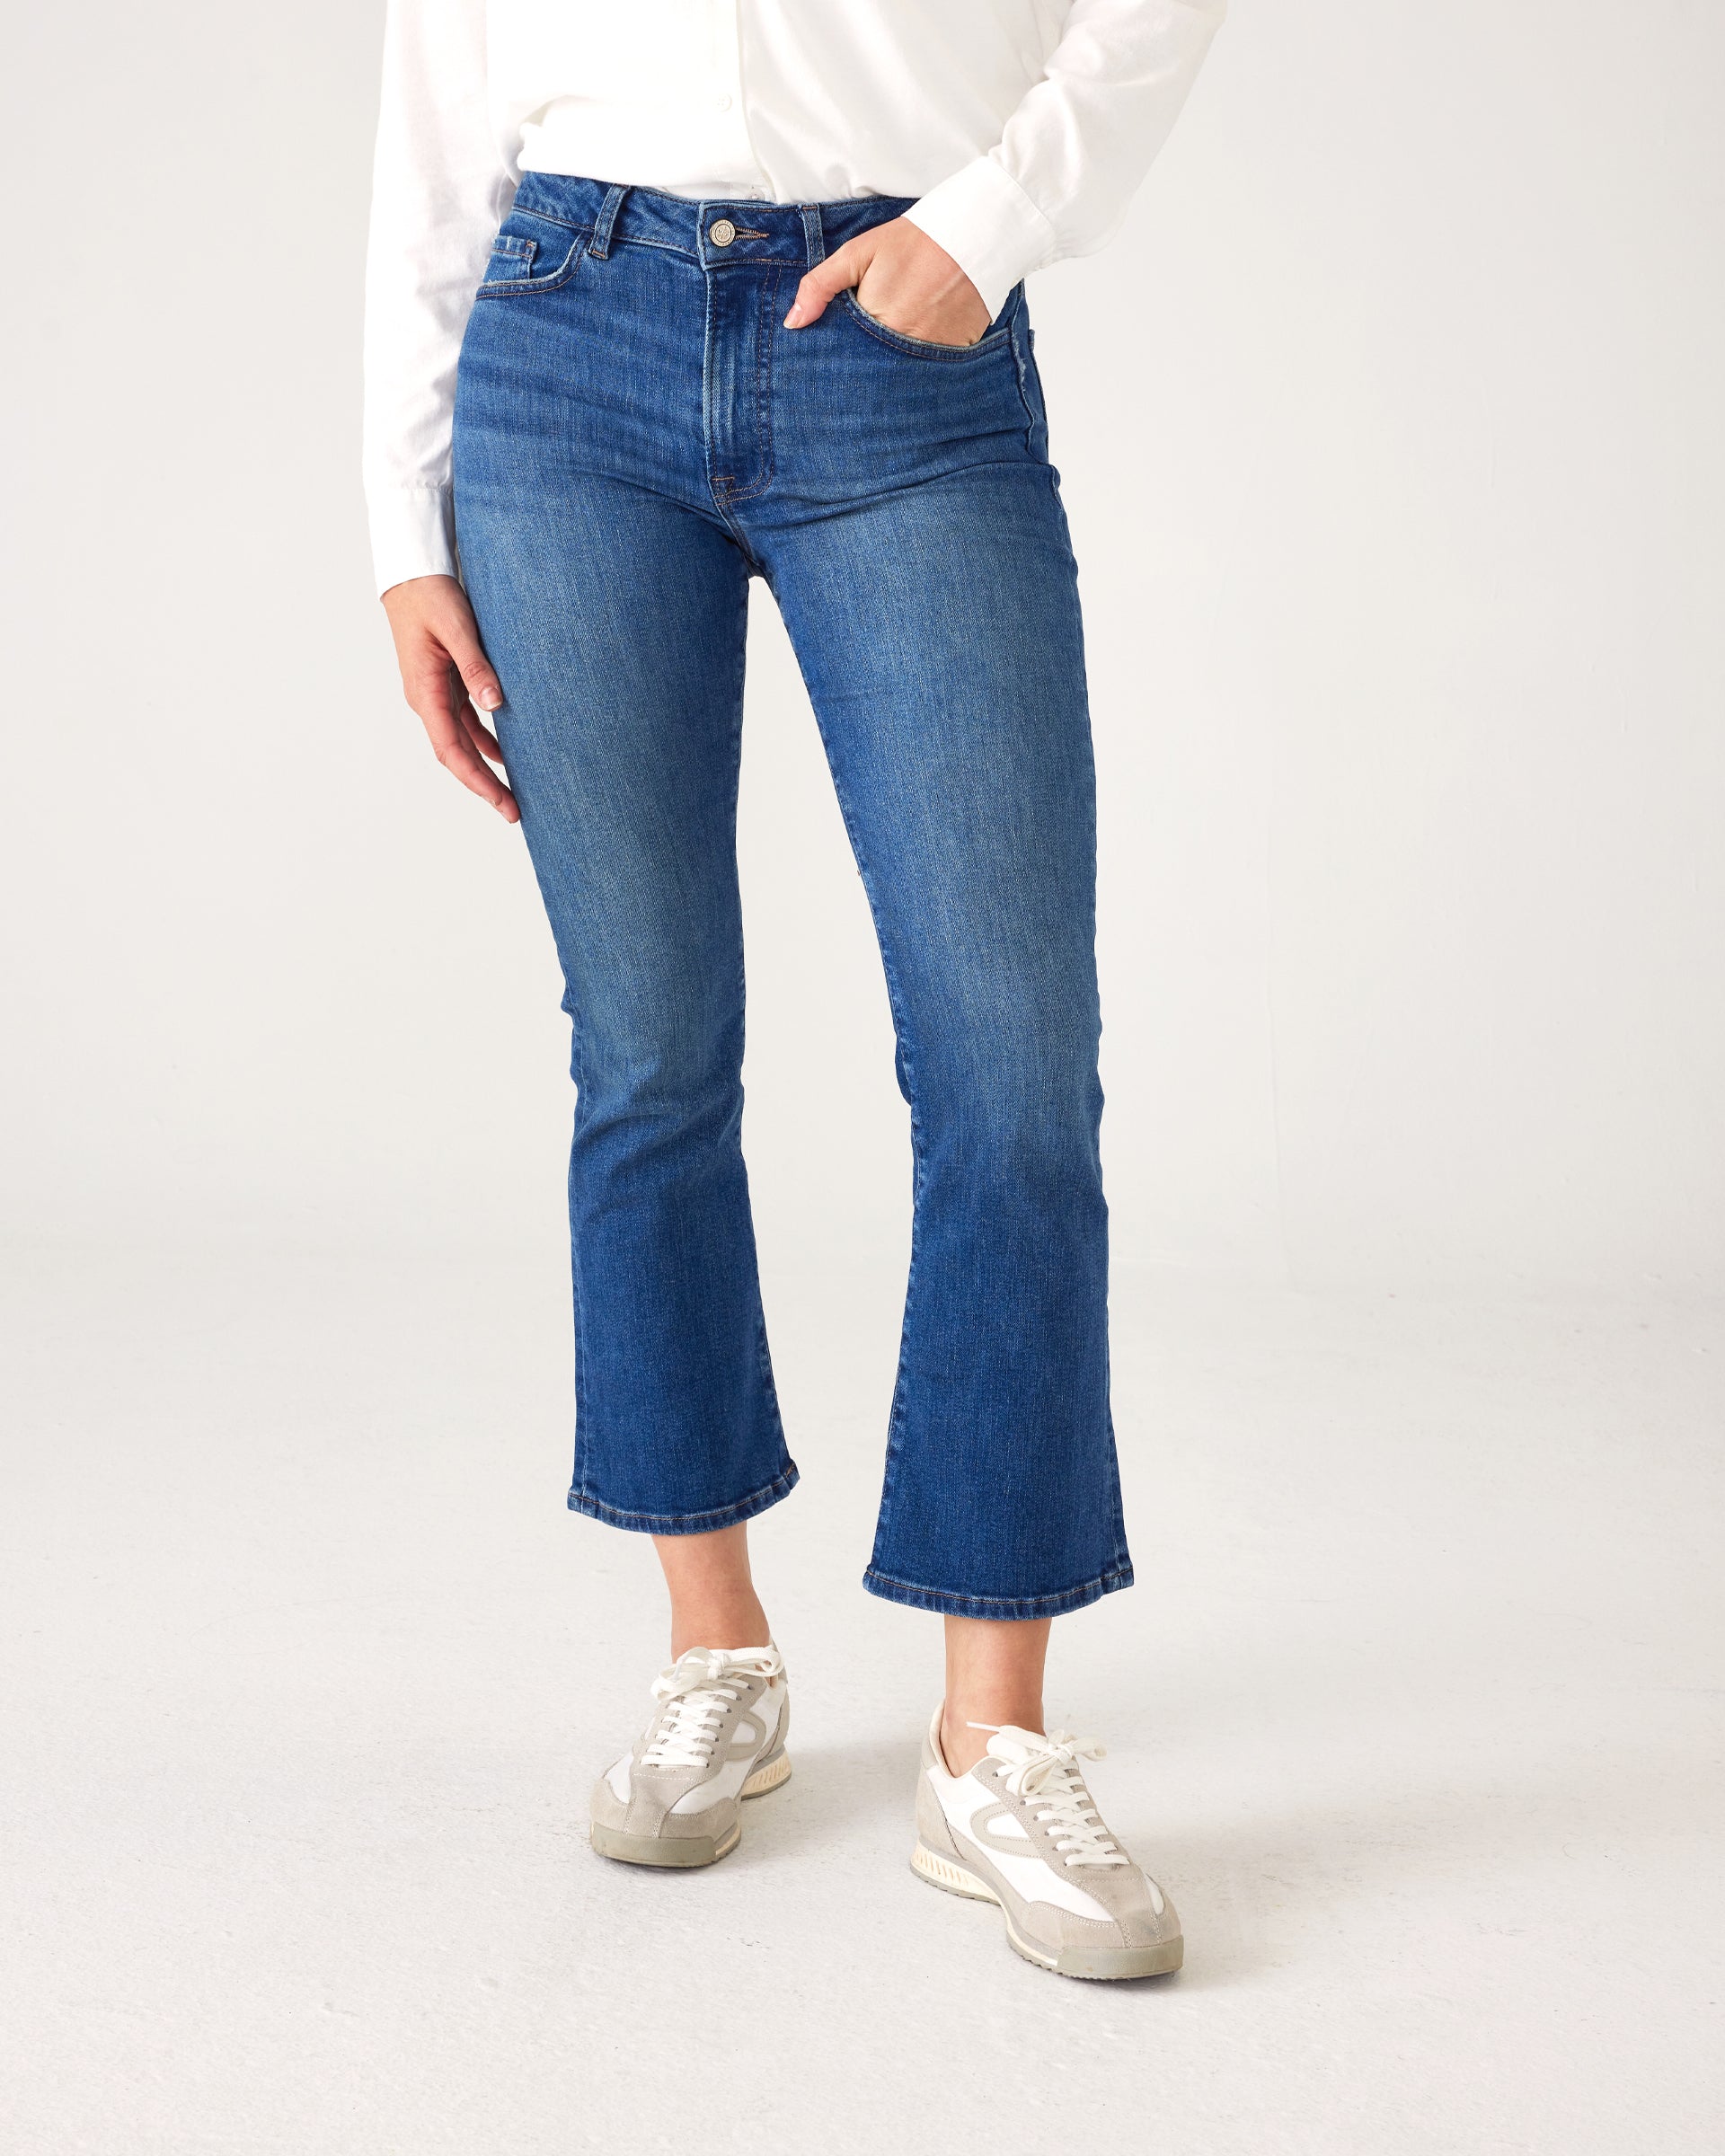 lower body of Woman wearing Mersea Infinity blue Nomad cropped mini boot-cut jeans standing against white background